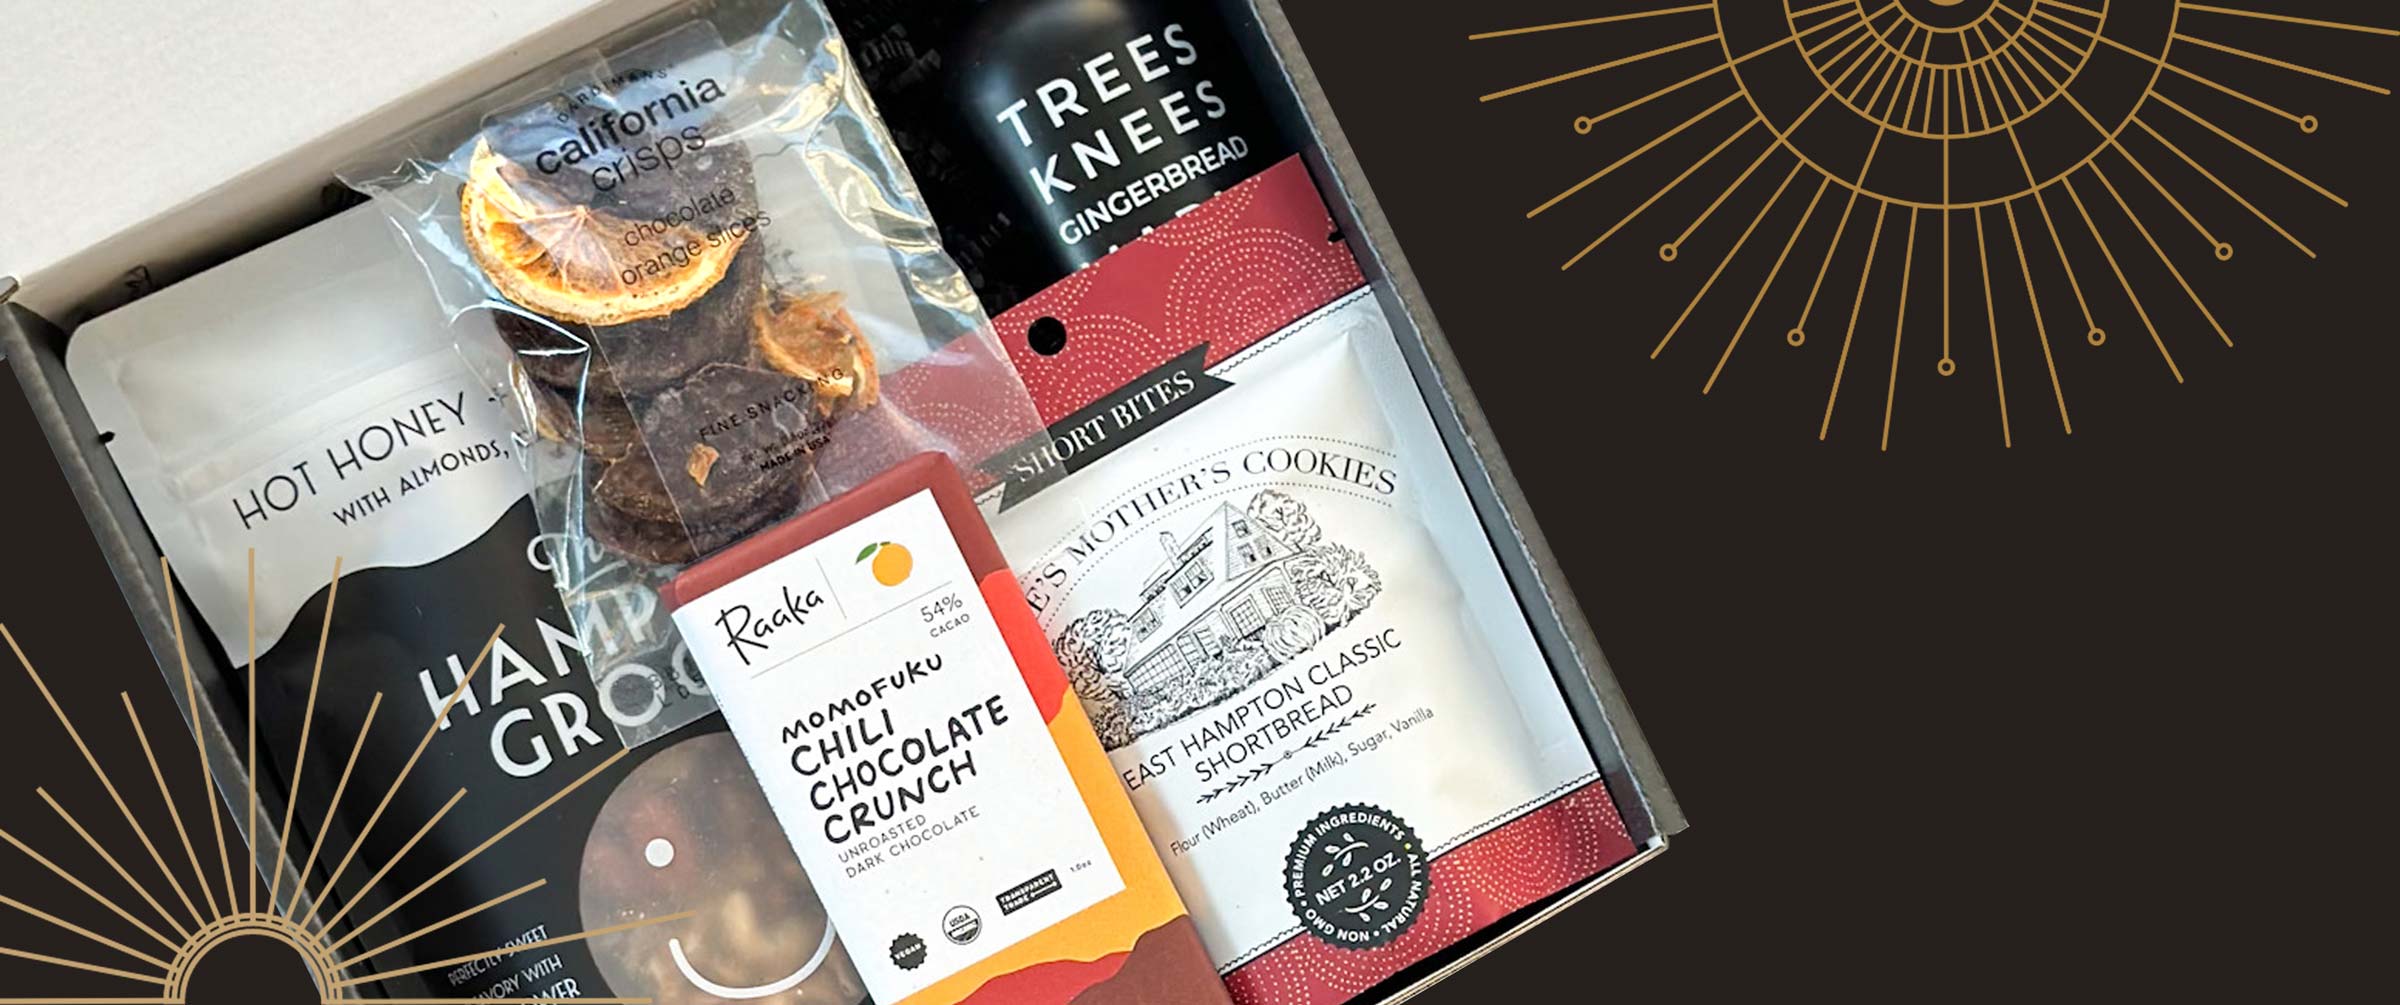 kadoo custom curated gift box for everyday and corporate clients. Gourmet snack with raaka momoffuku chocolate, granola, cookie, orange slice, maple syrup and more